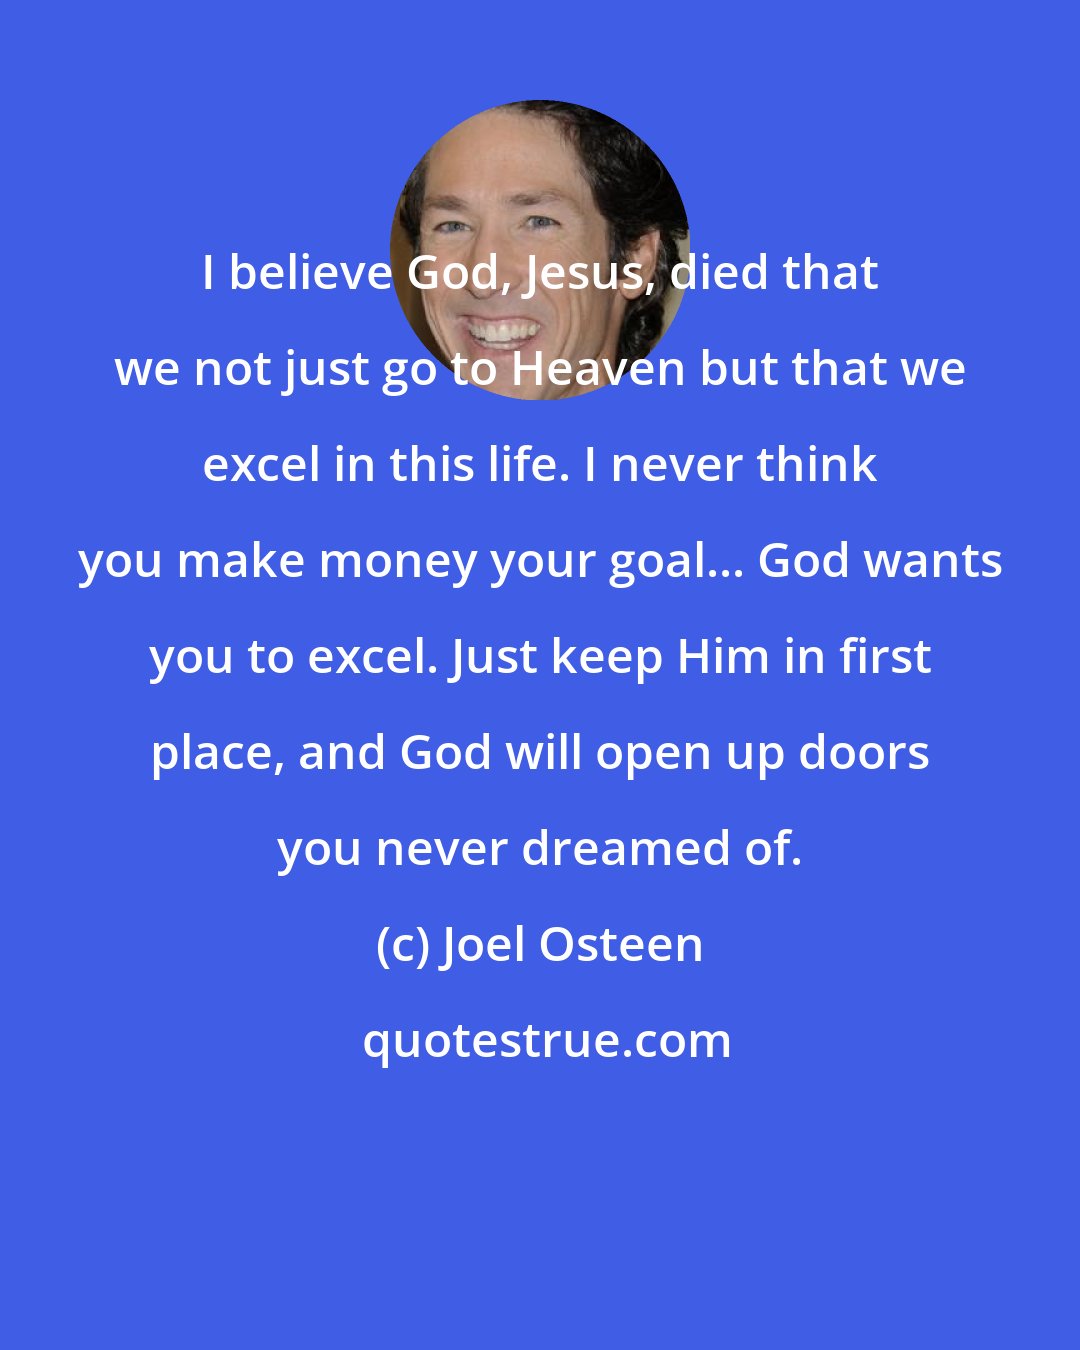 Joel Osteen: I believe God, Jesus, died that we not just go to Heaven but that we excel in this life. I never think you make money your goal... God wants you to excel. Just keep Him in first place, and God will open up doors you never dreamed of.